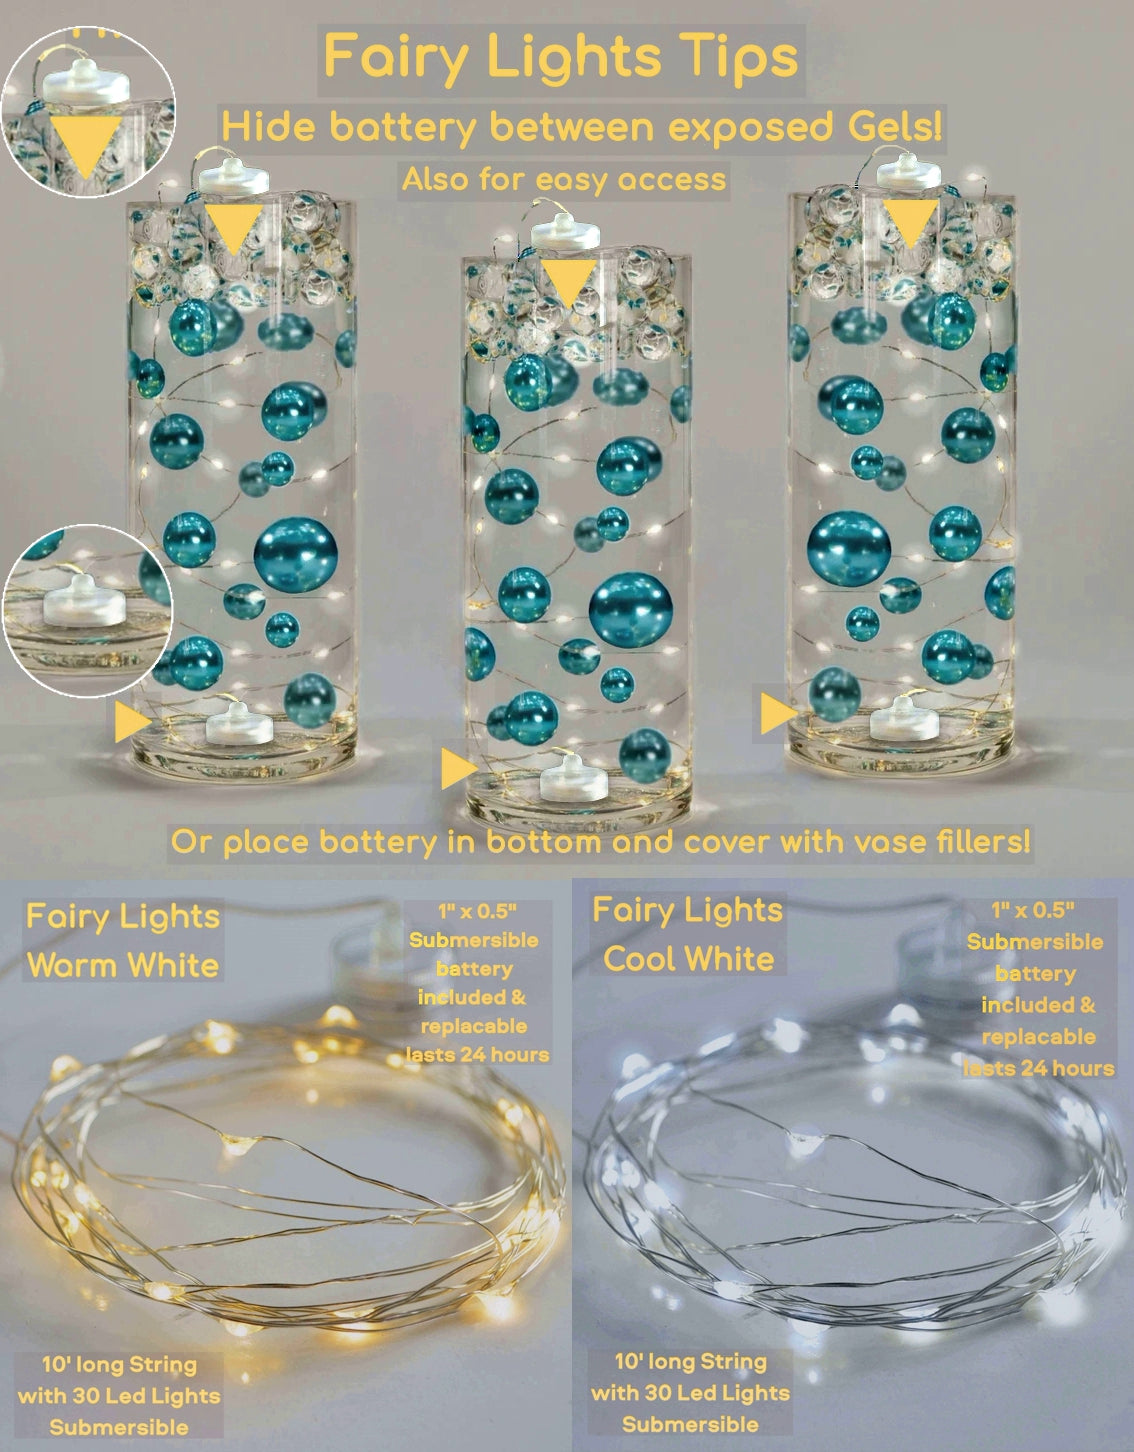 Floating Light Lavender Pearls - Shiny - Jumbo Sizes - Fills 1 GL For Your Vases - With Transparent Gels Kit for the Floating Effect - Option 3 Fairy Lights - Vase Decorations